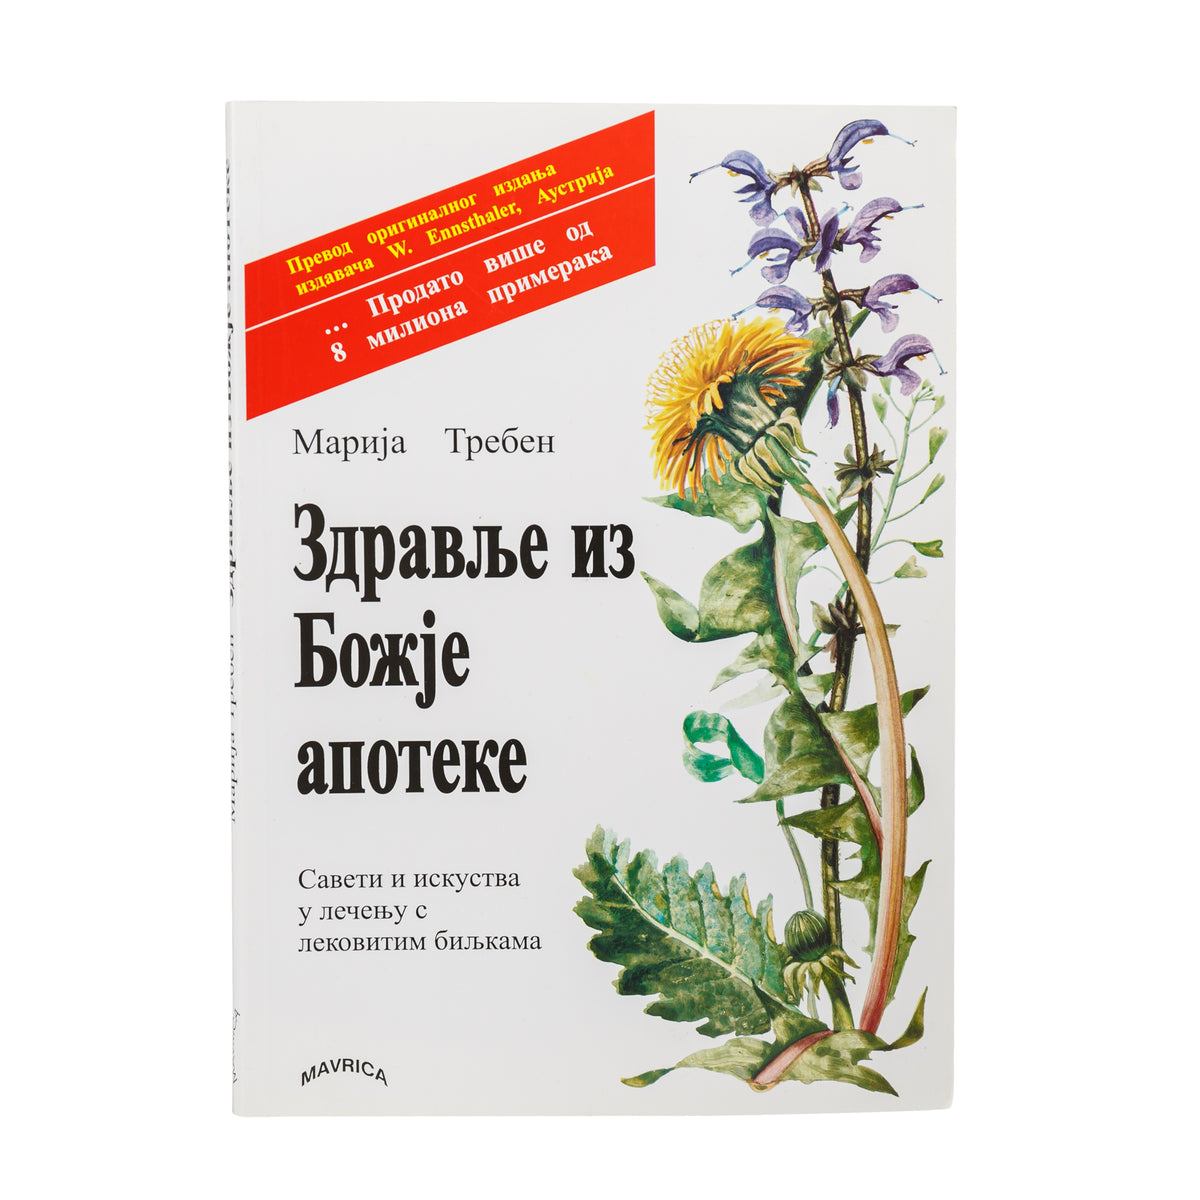 Primary Image of Through God's Pharmacy (Serbian Edition)